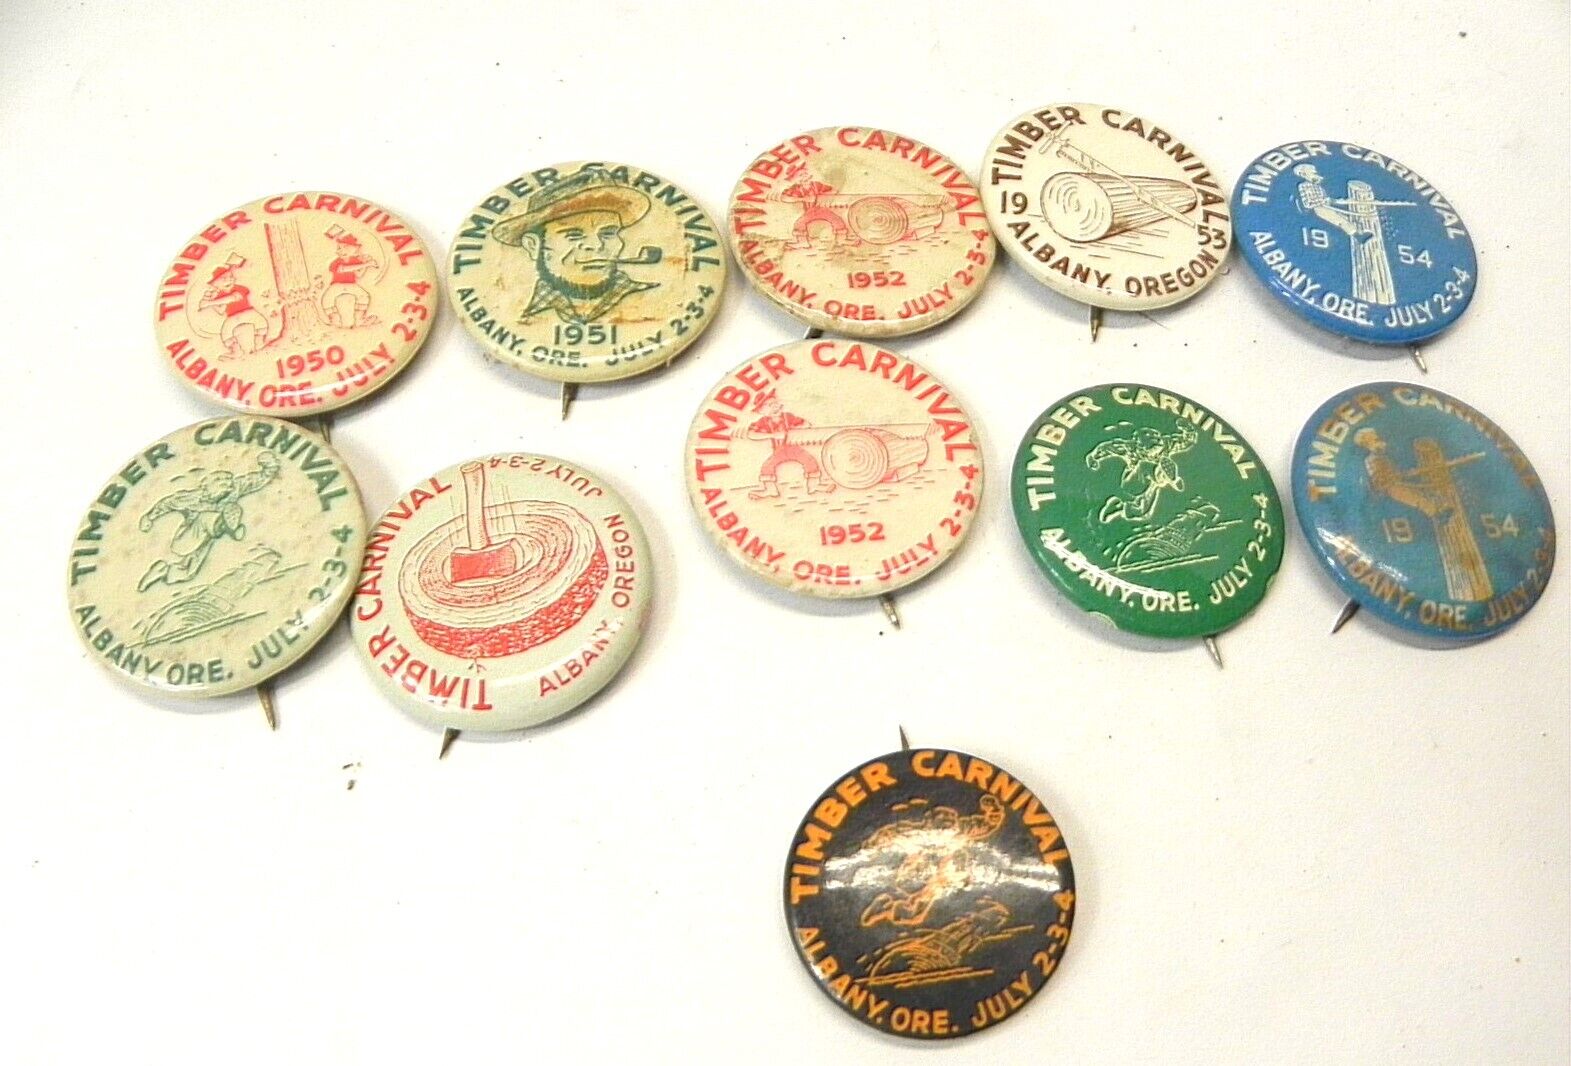 1950S ALBANY OREGON TIMBER CARNIVAL BUTTONS COLLECTIBLE LOT OF 11 1950-1954